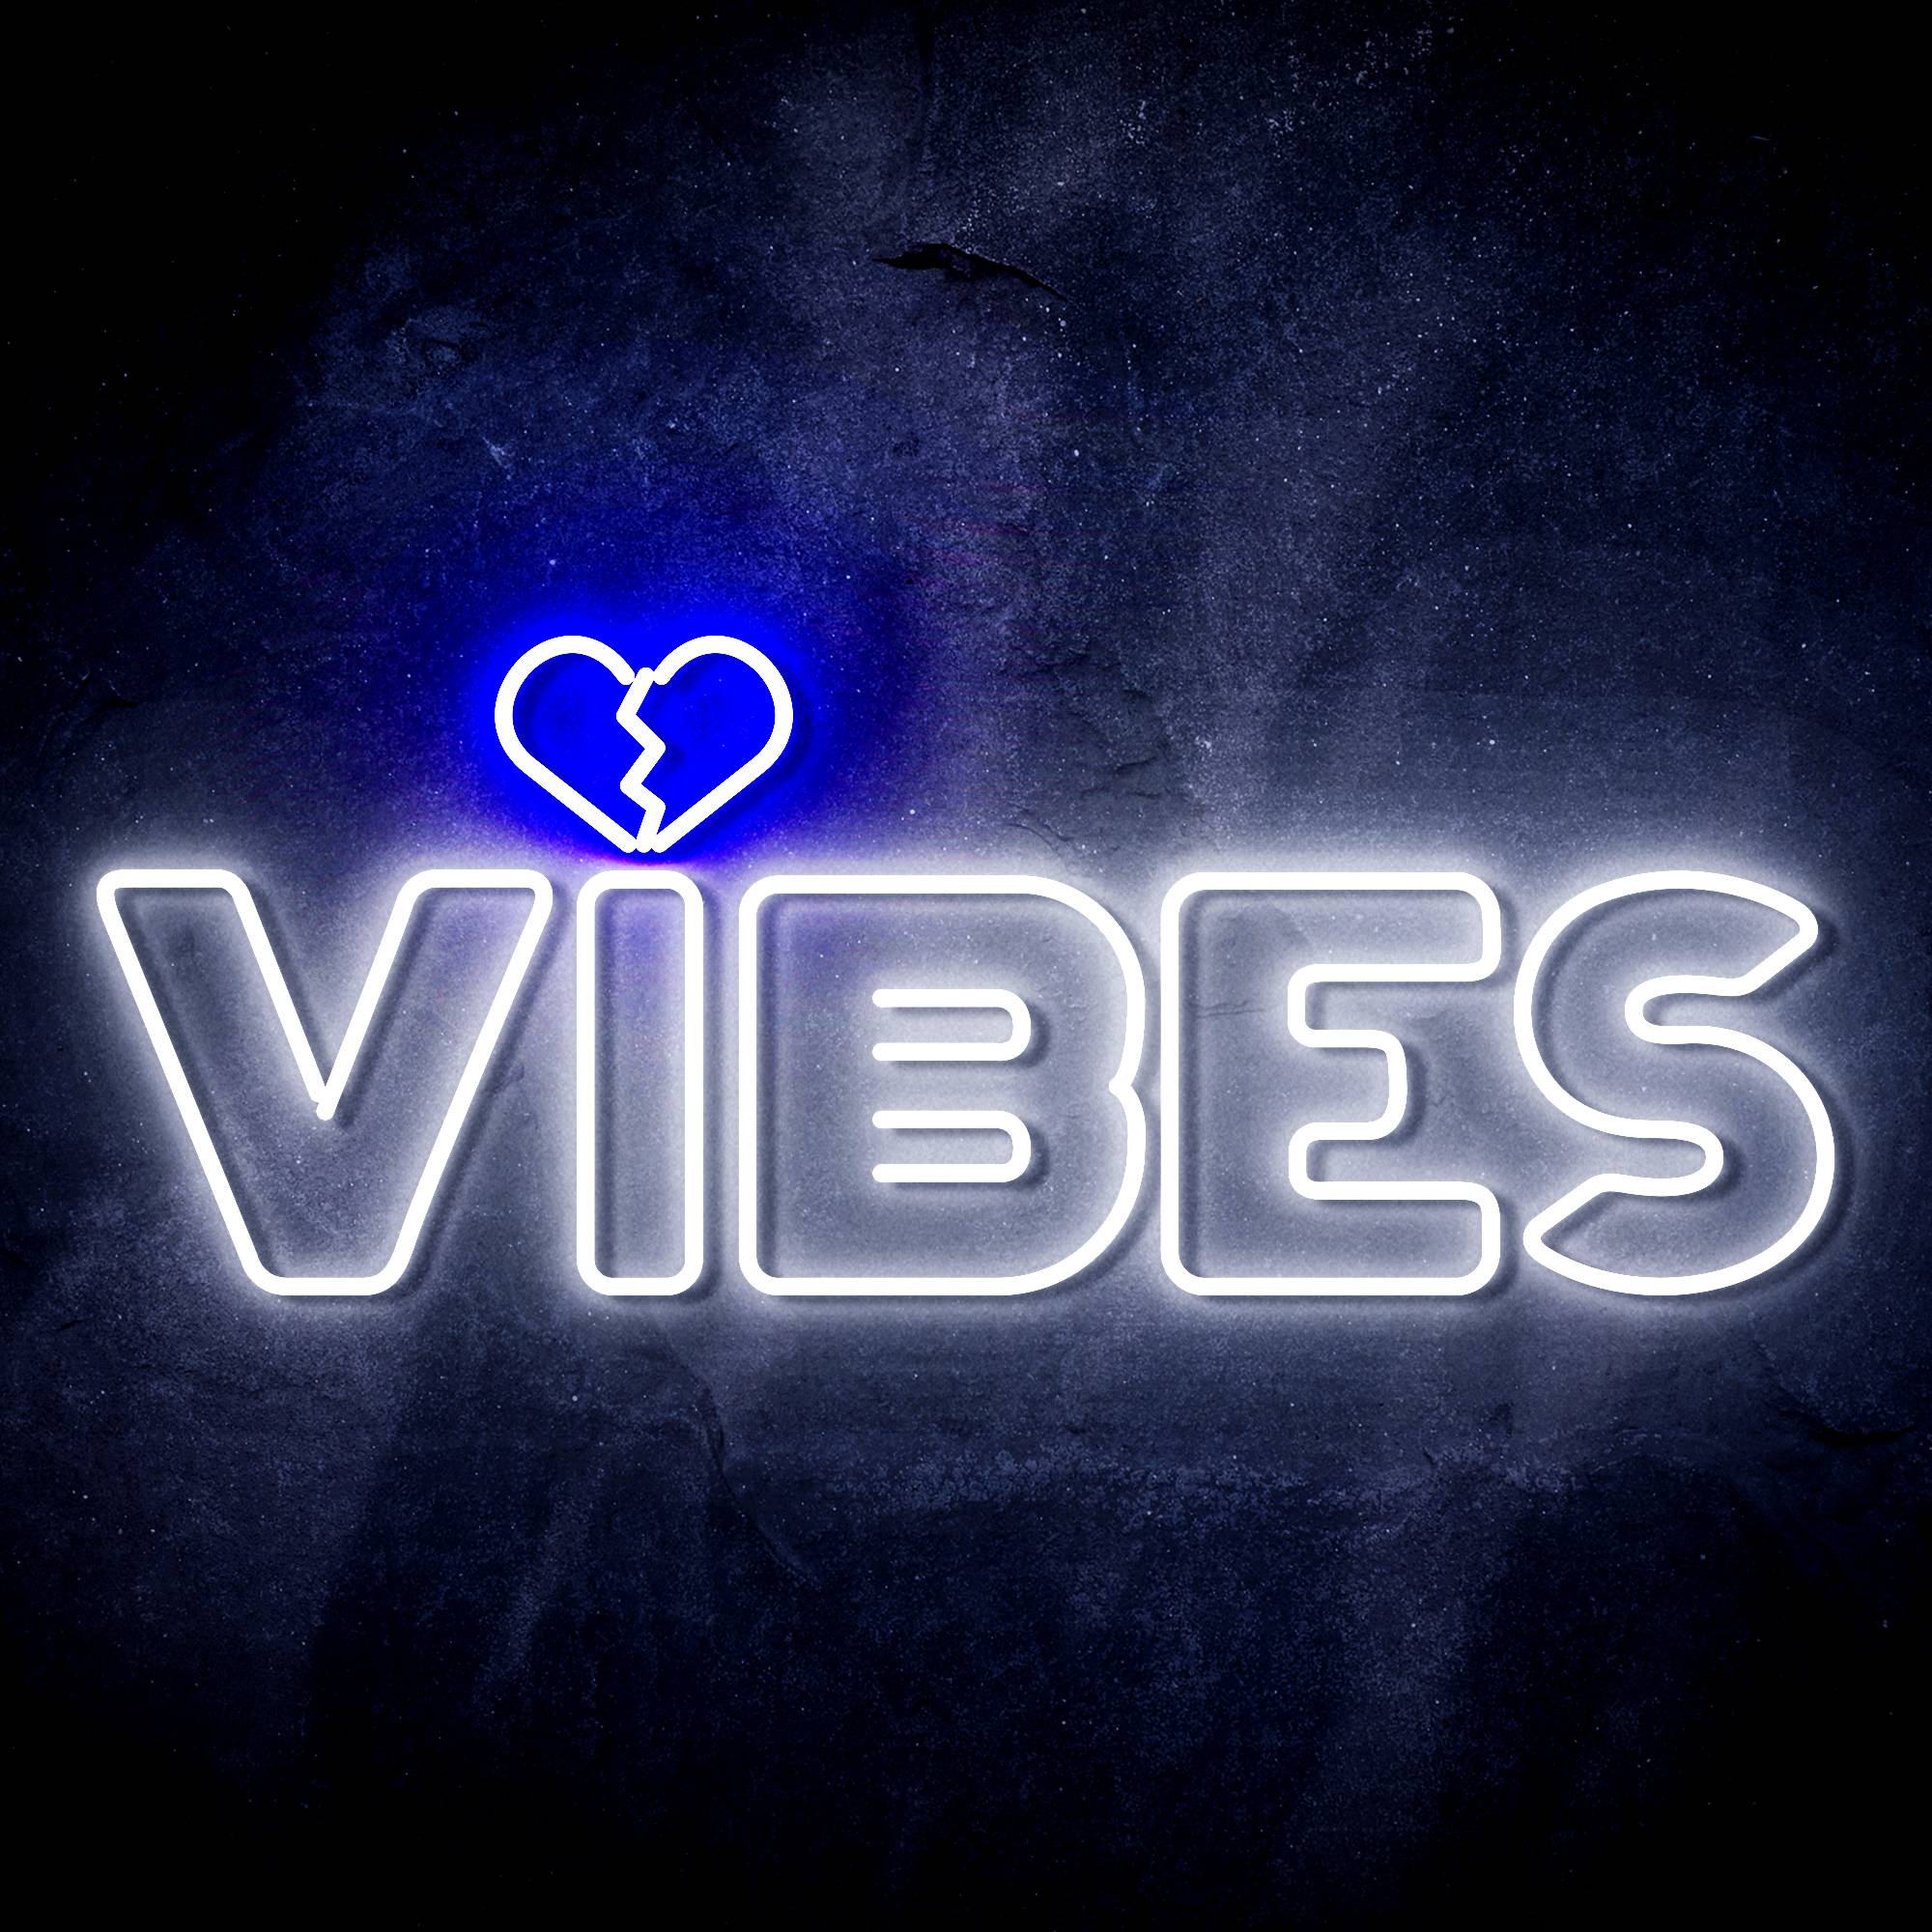 VIBES with Heart LED Neon Sign